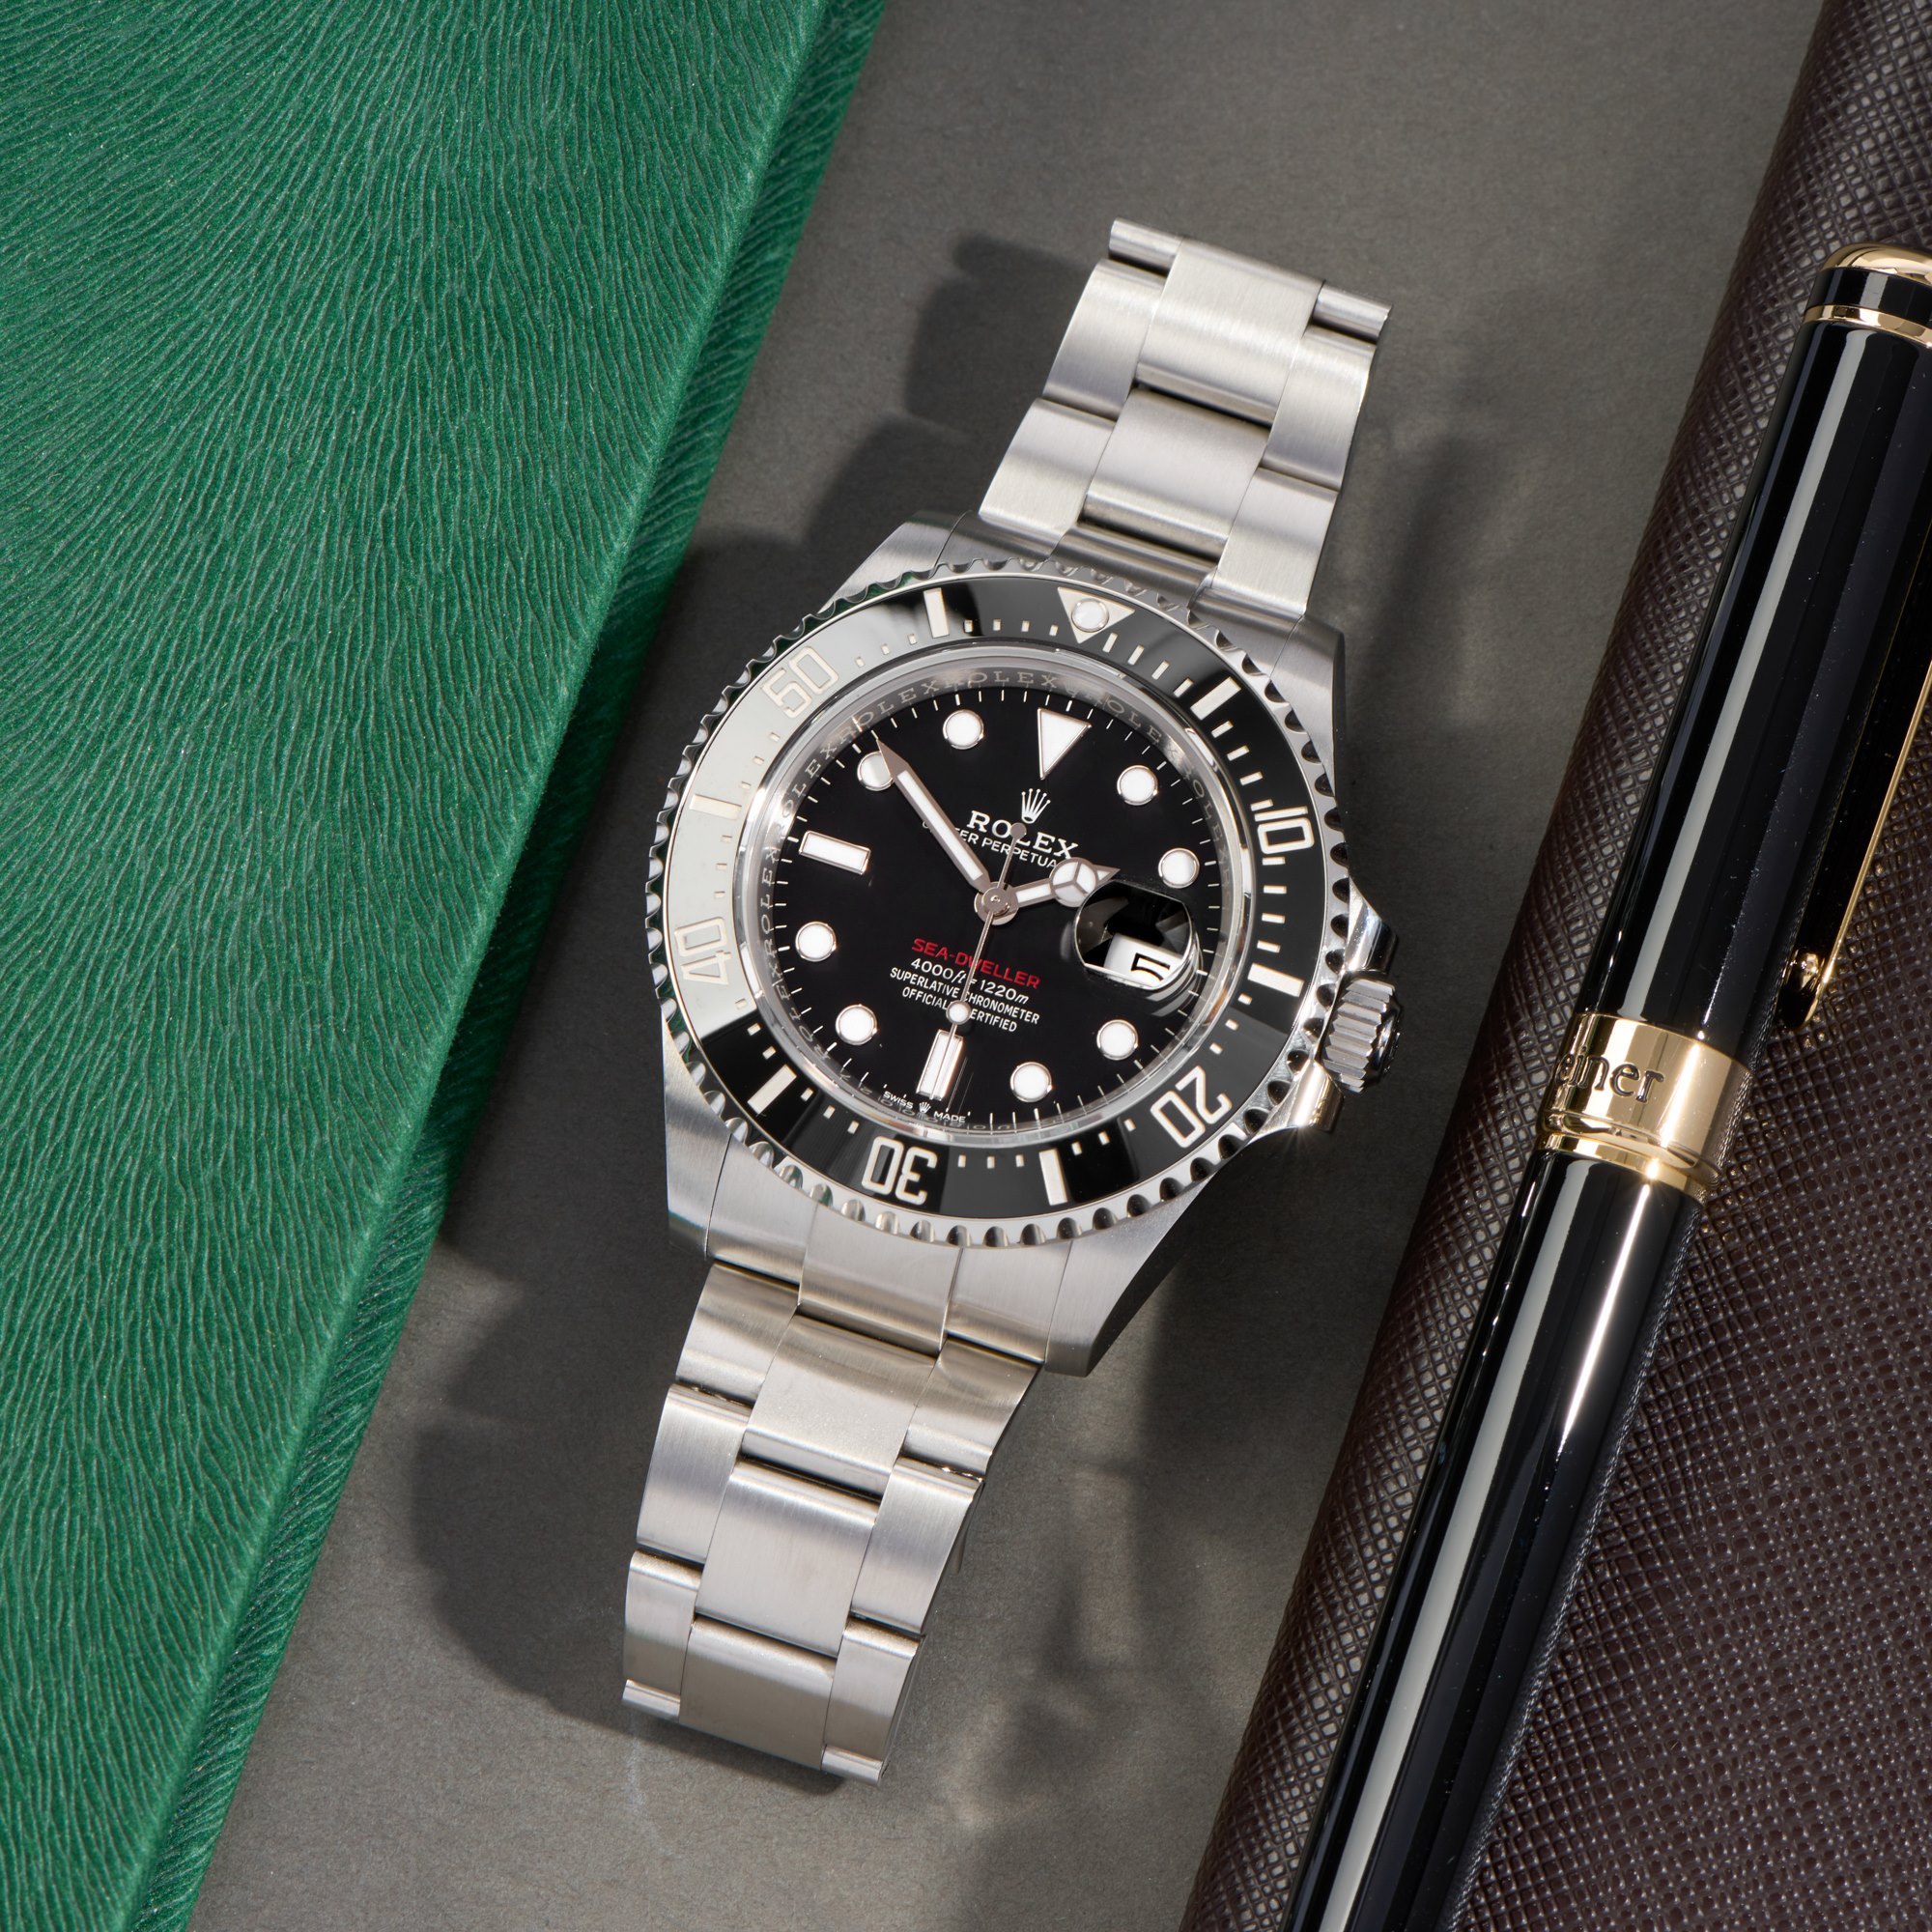 Rolex Sea-Dweller 50th Anniversary Red Writing Stainless Steel 126600